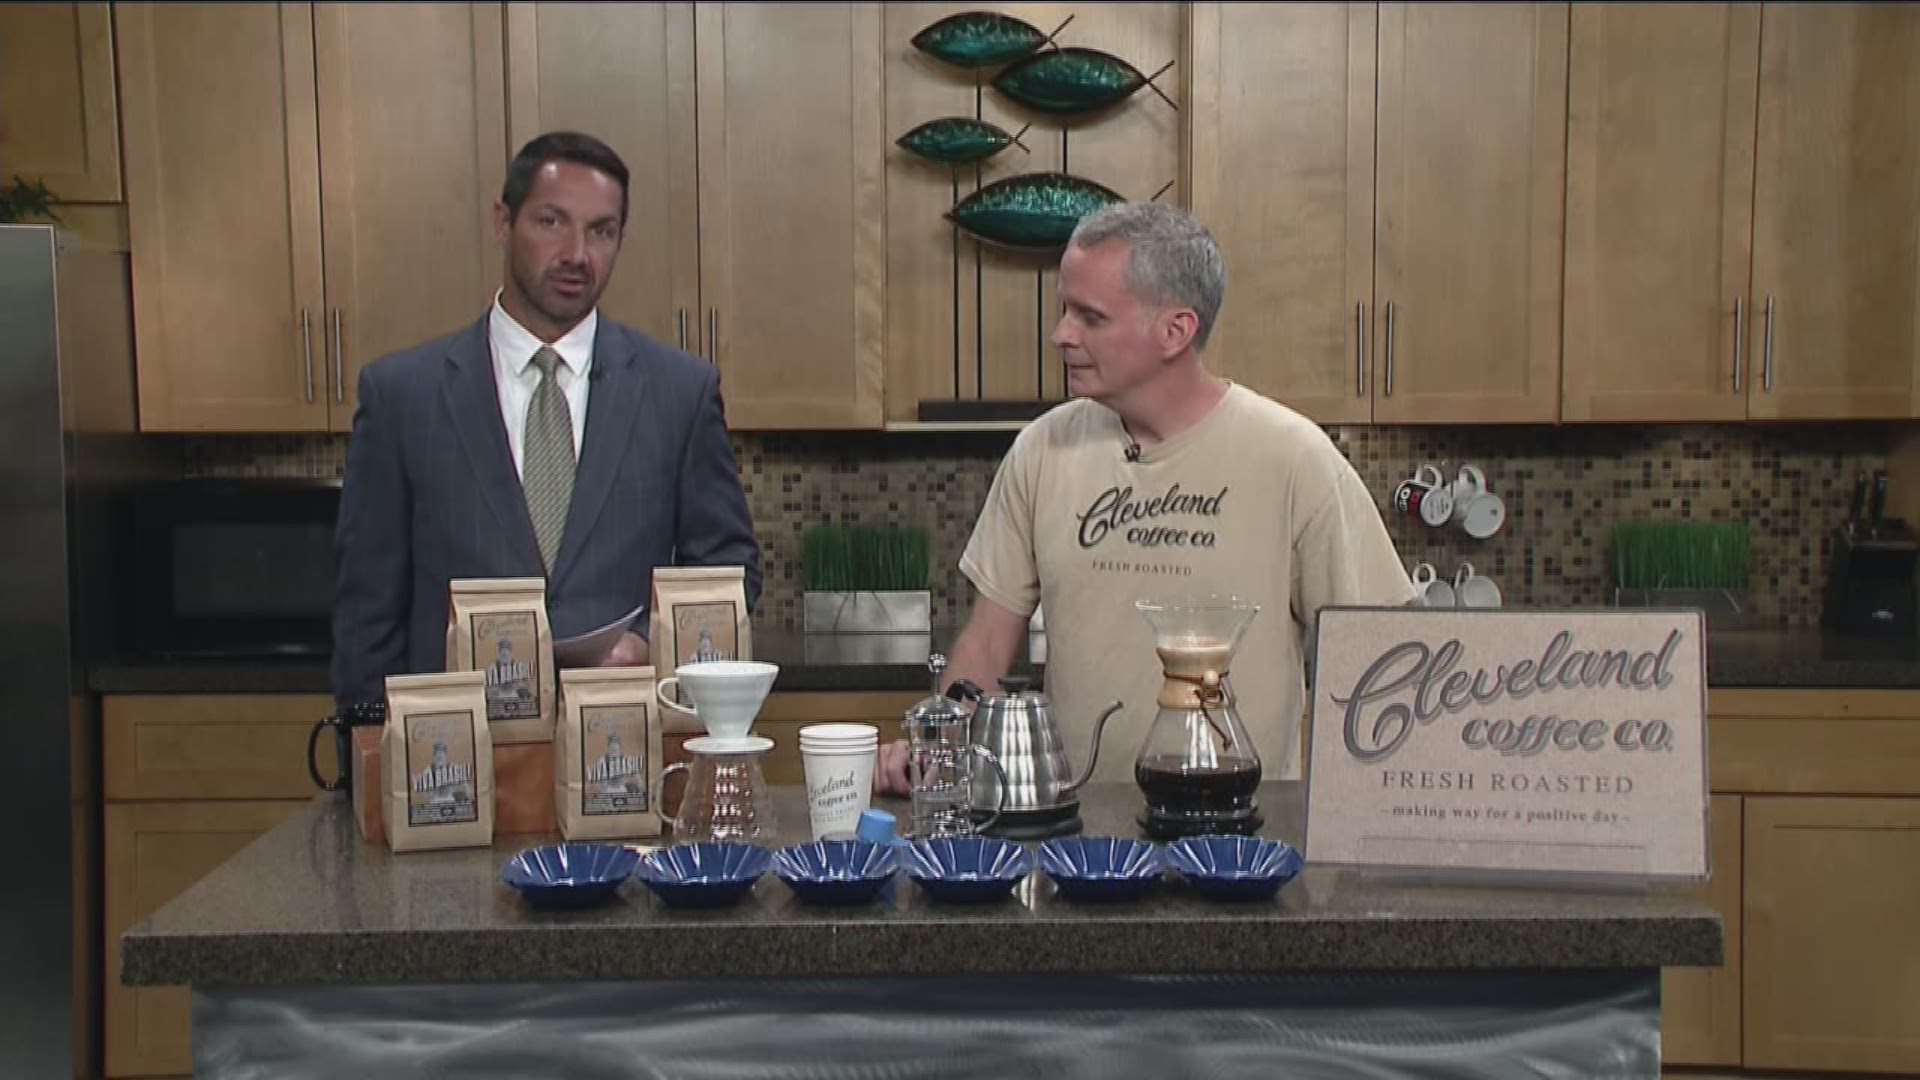 Cleveland-based Cleveland Coffee Company has partnered with Cleveland Indians Catcher Yan Gomes to produce a unique coffee blend called "Viva Brasil". Owner of CLE Coffee Co., Brendan Walton joins us with more information!Contact Info : 816 Huron Road in Cleveland.                         216-861-8358                        www.ClevelandCoffeeCompany.com